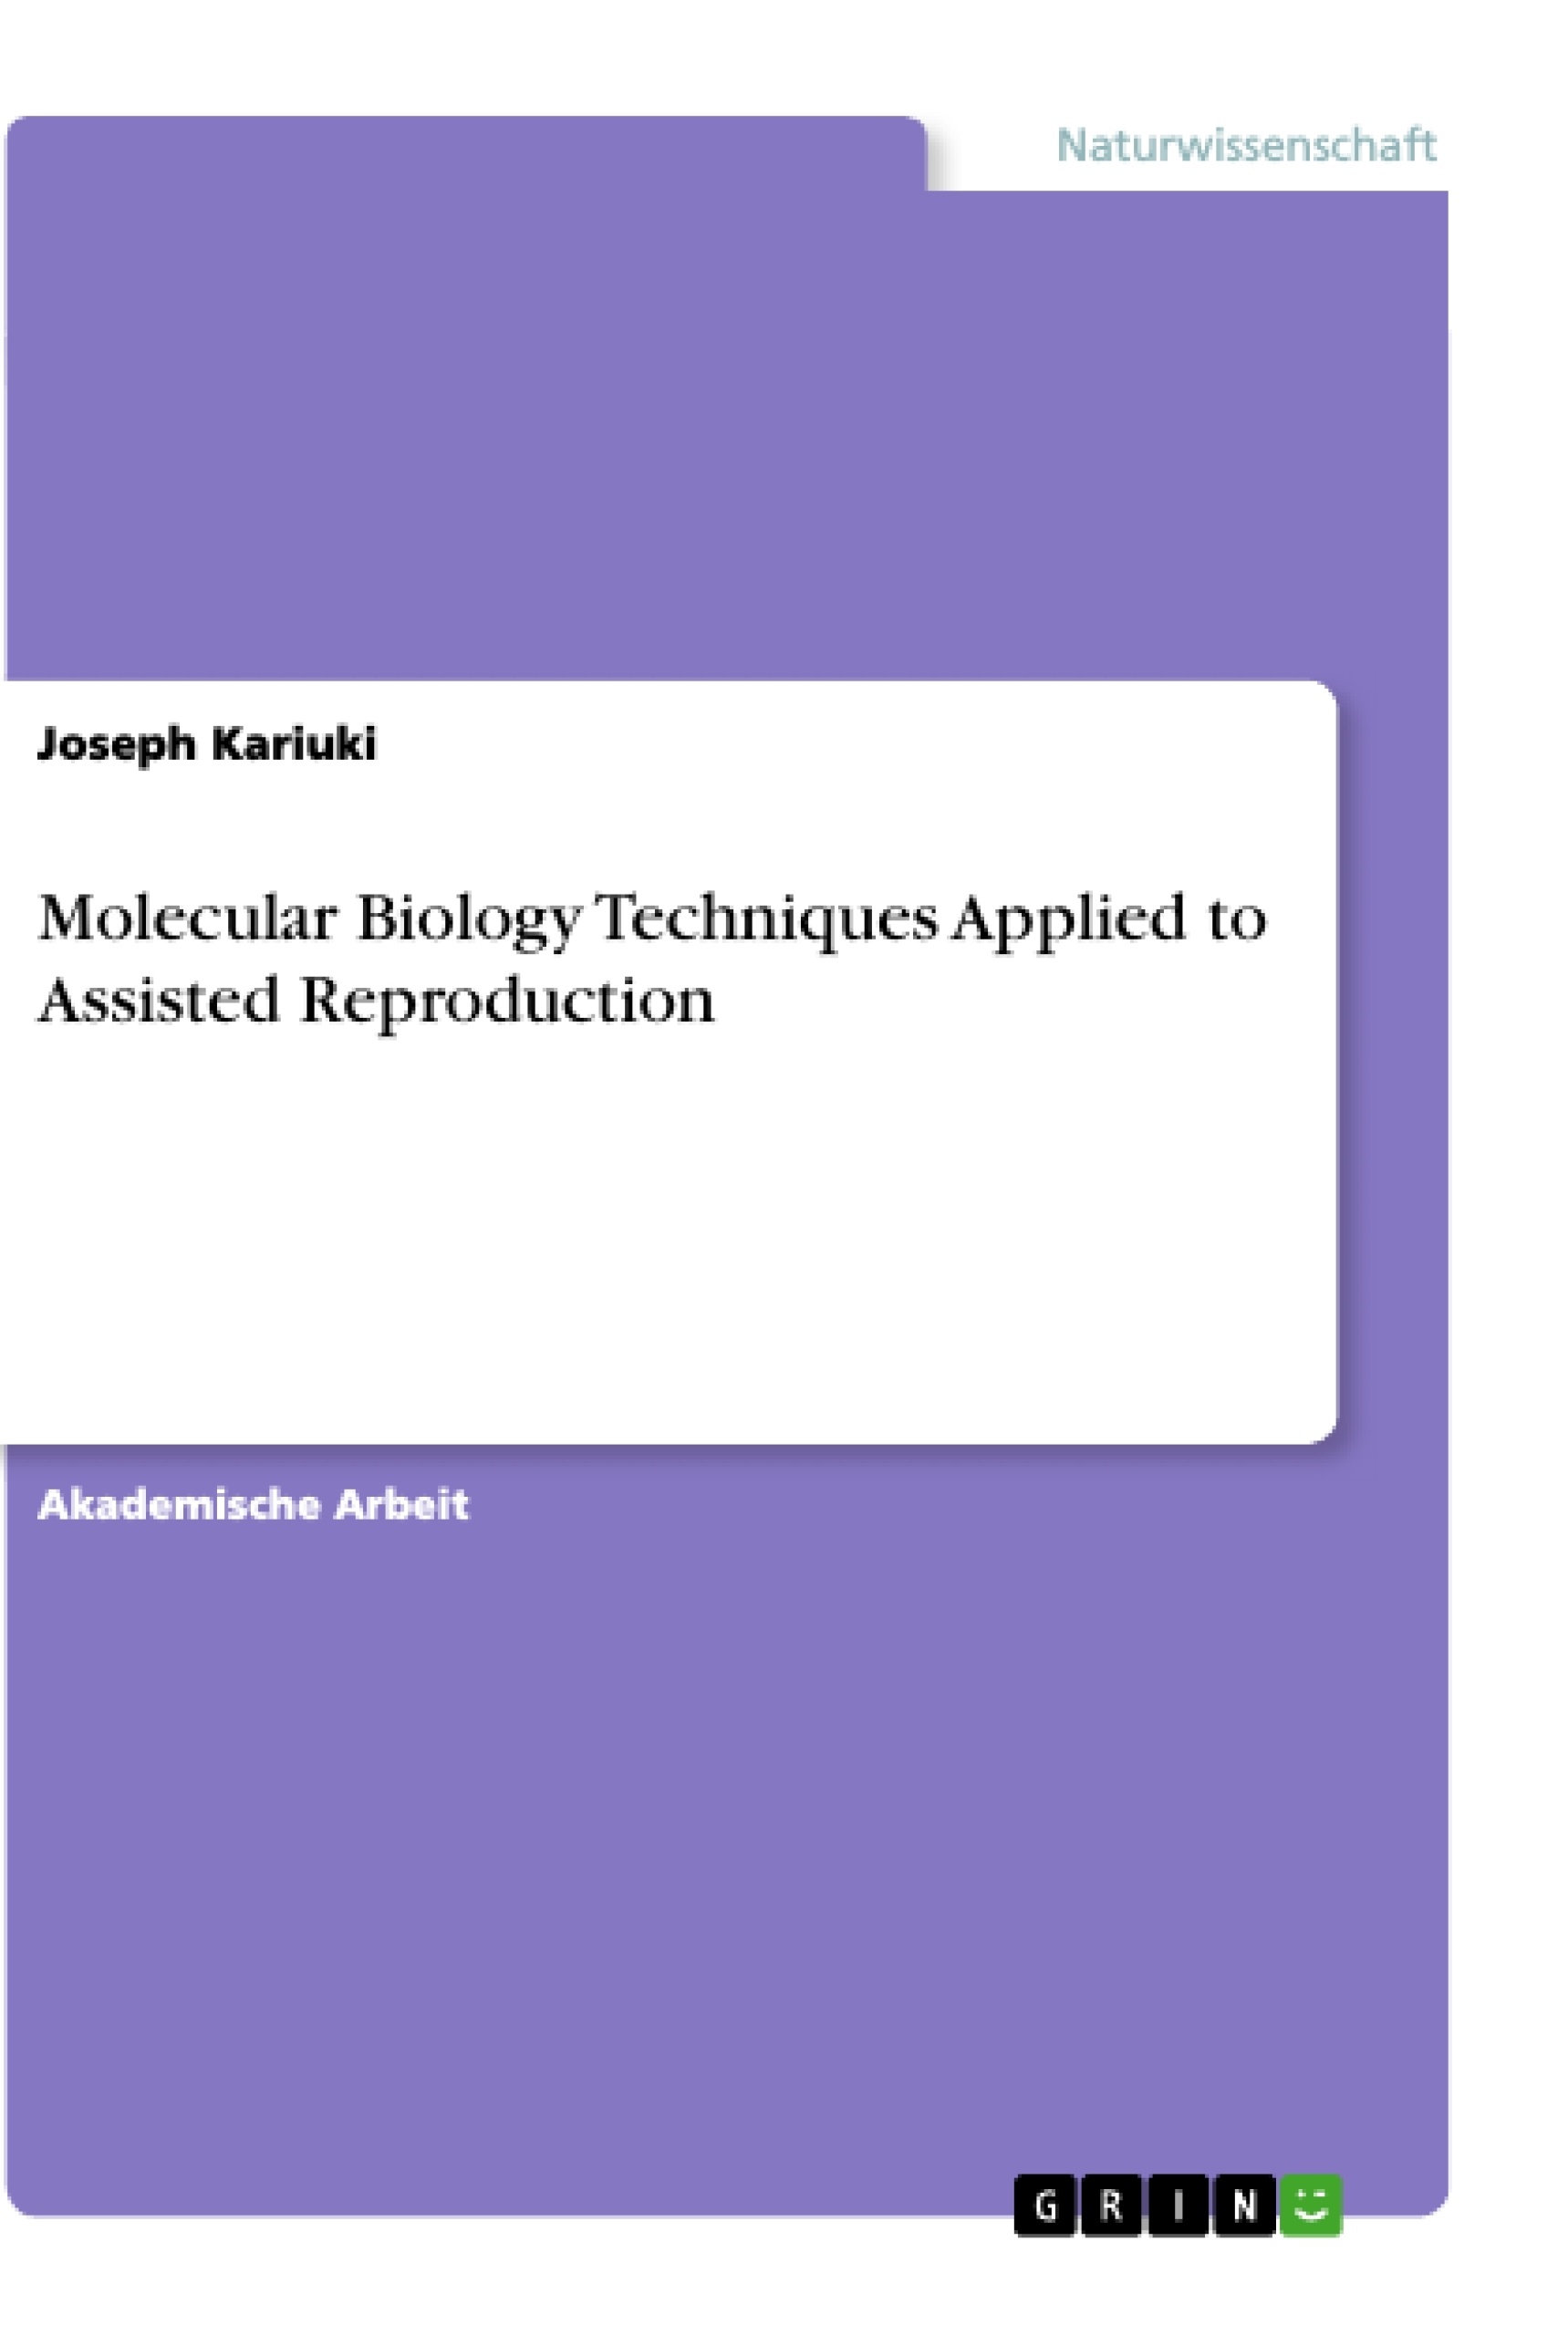 Titel: Molecular Biology Techniques Applied to Assisted Reproduction